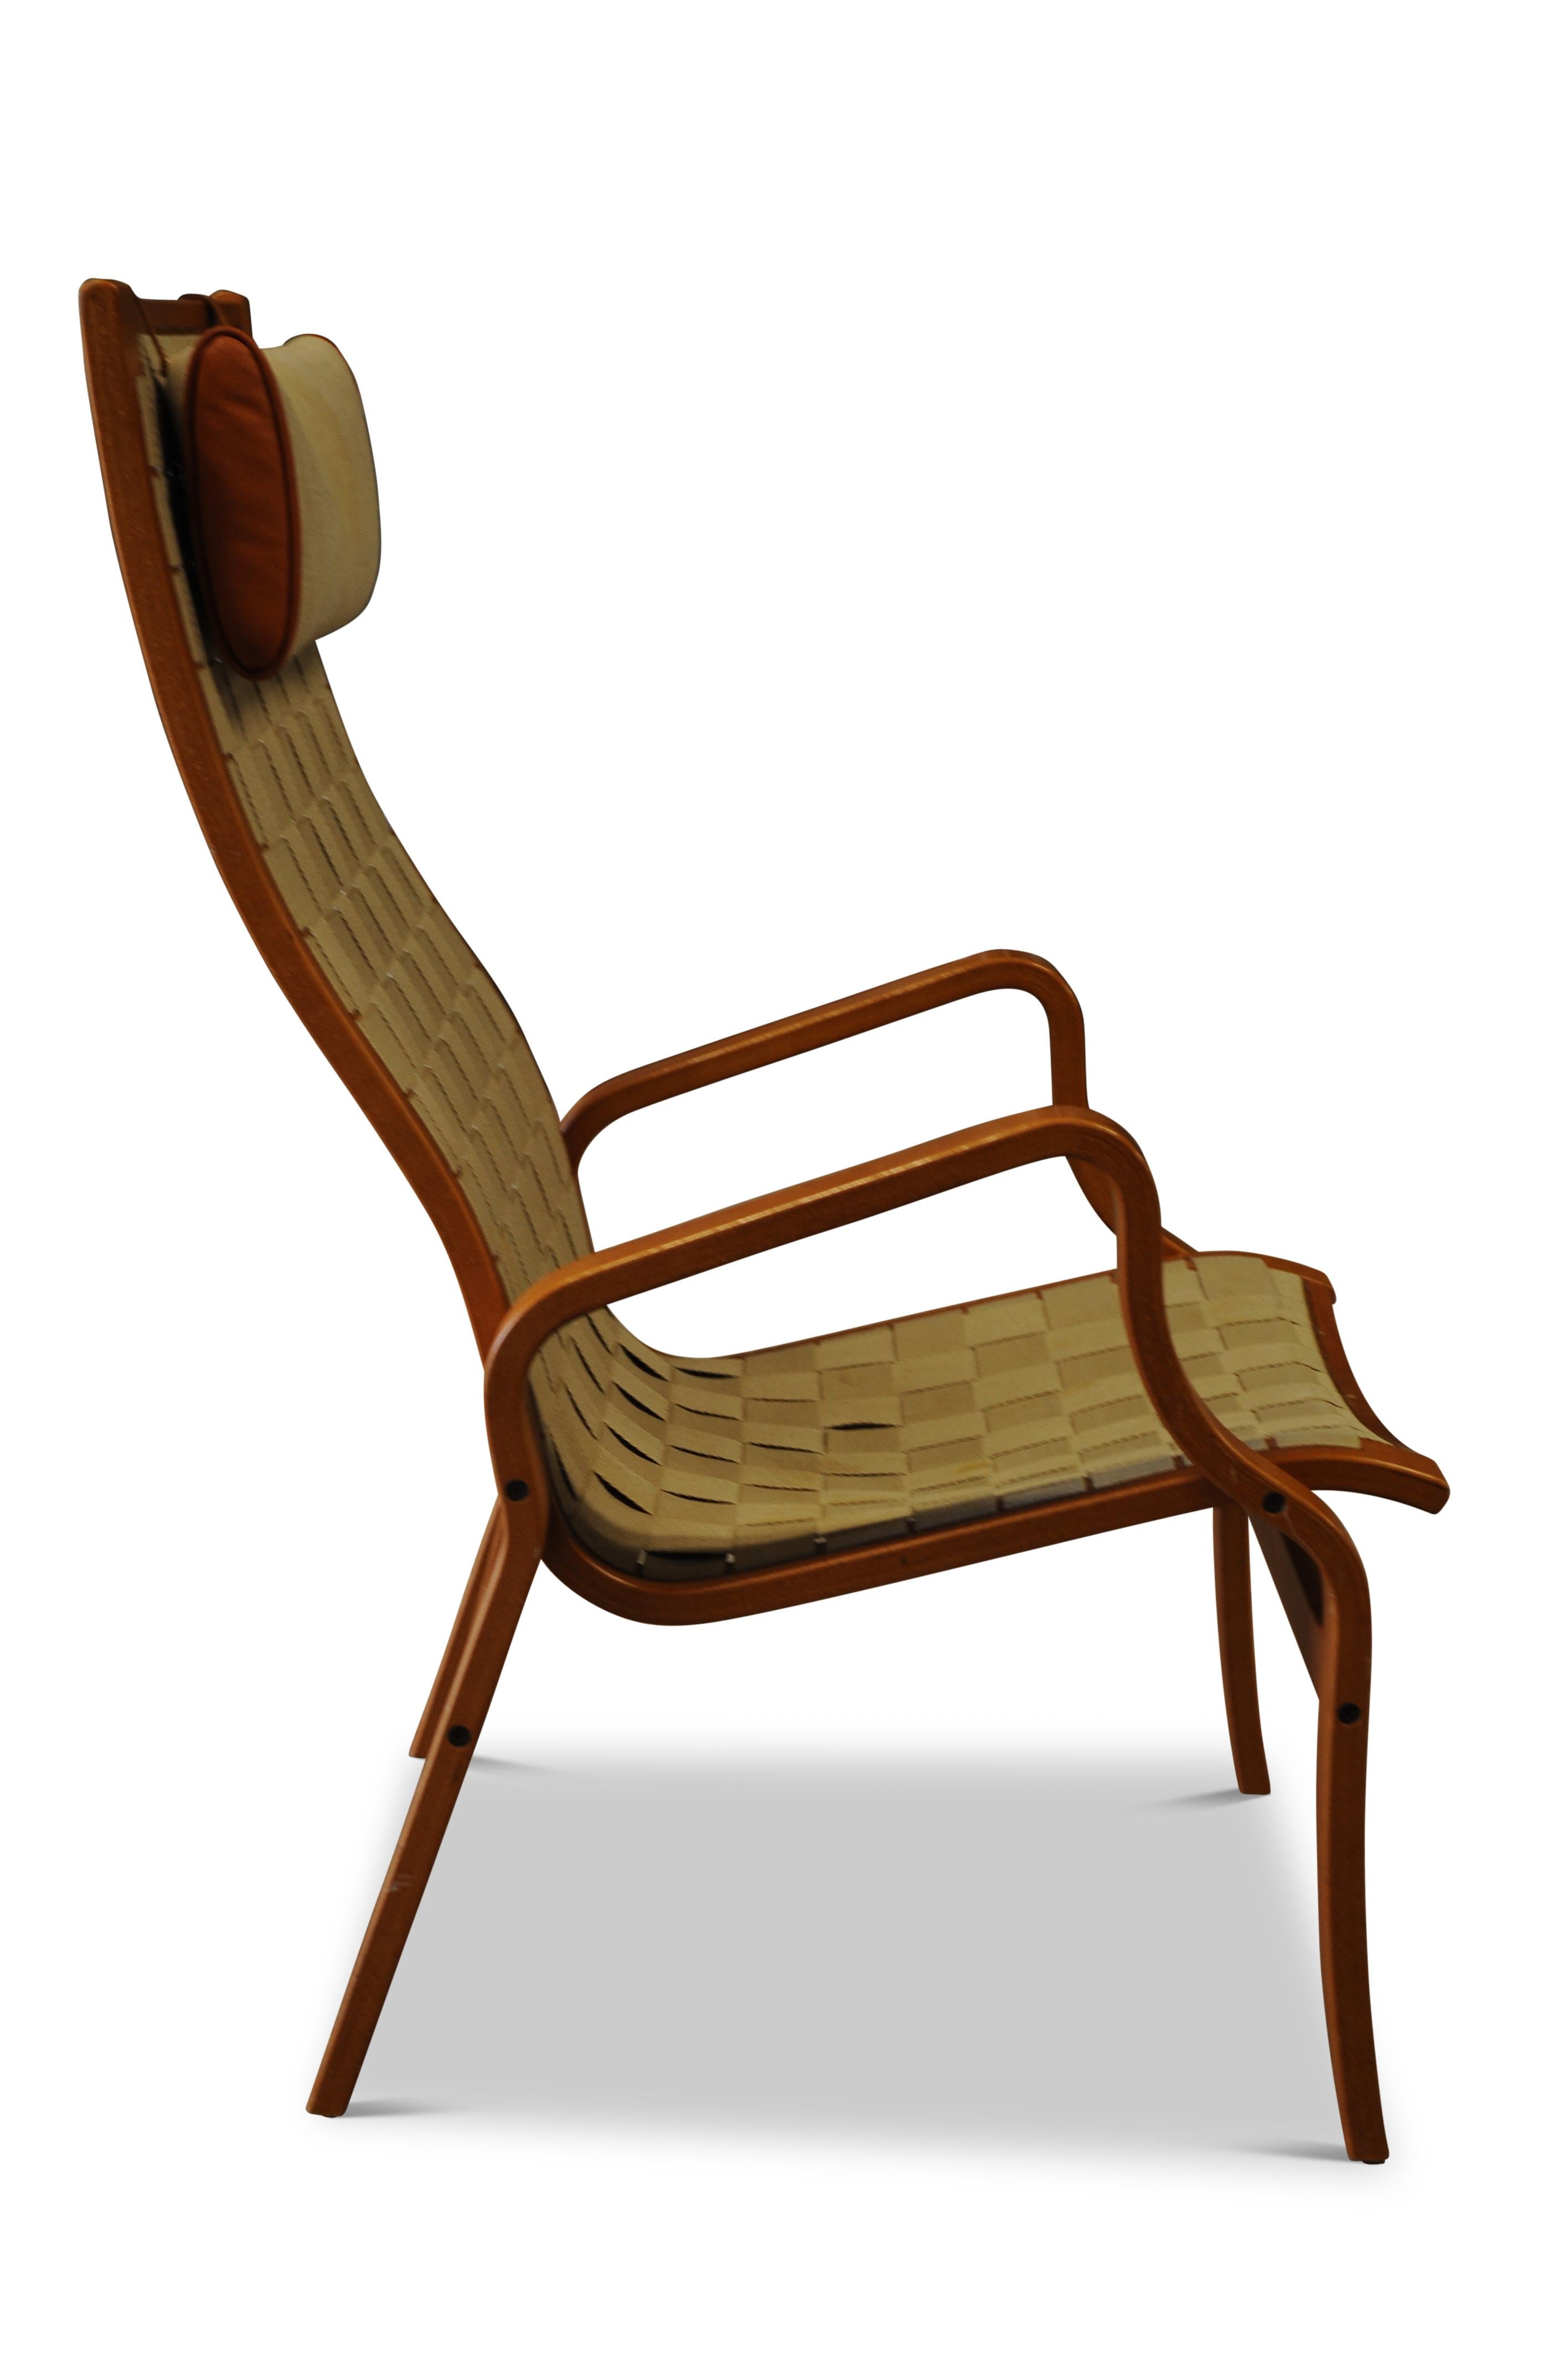 Late 20th Century Bruno Mathsson Style Chair with Woven Strap Upholstery & Beech Bentwood Frame For Sale